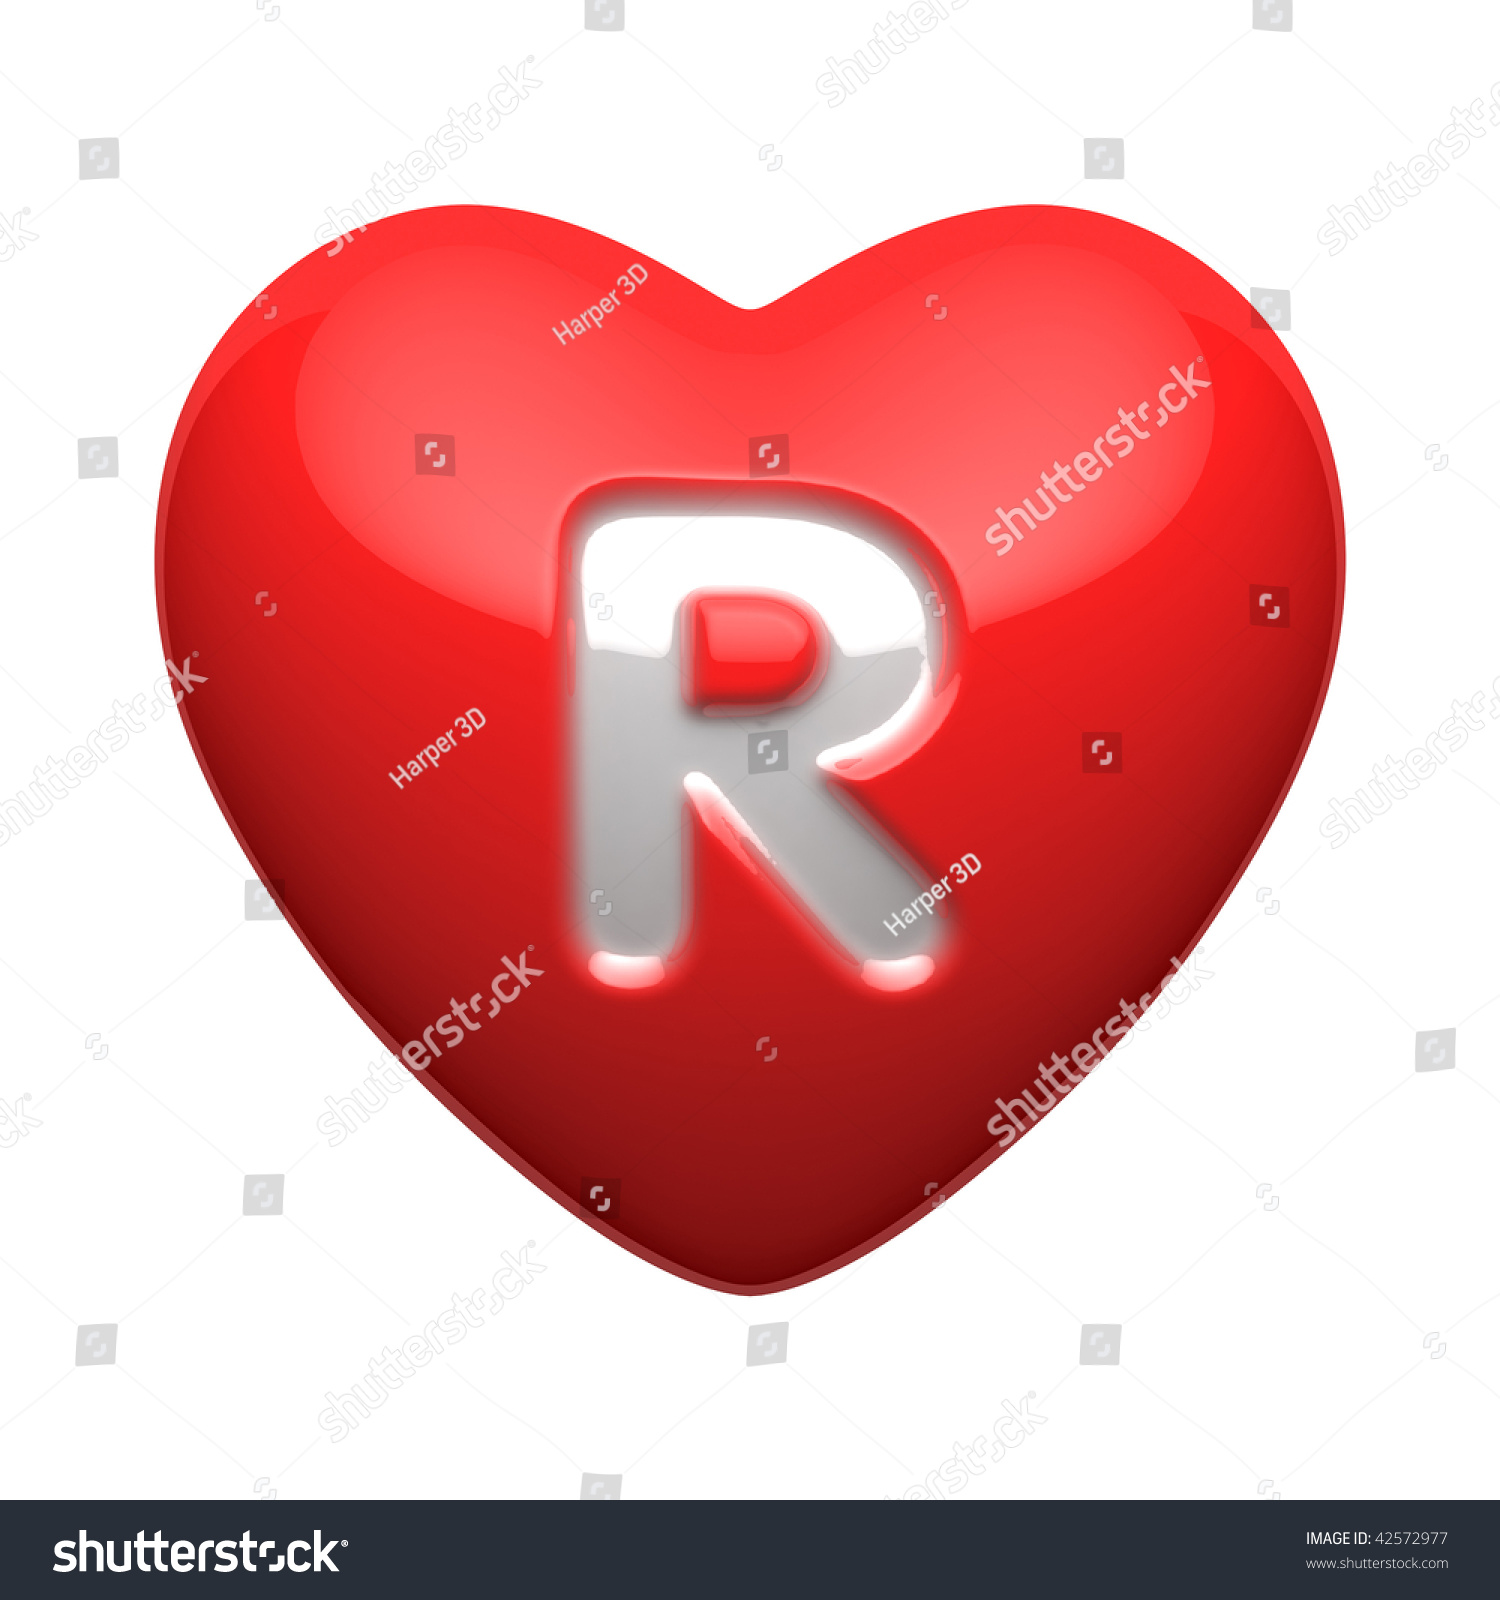 Letter R Alphabet Hearts There Clipping Stock Illustration ...